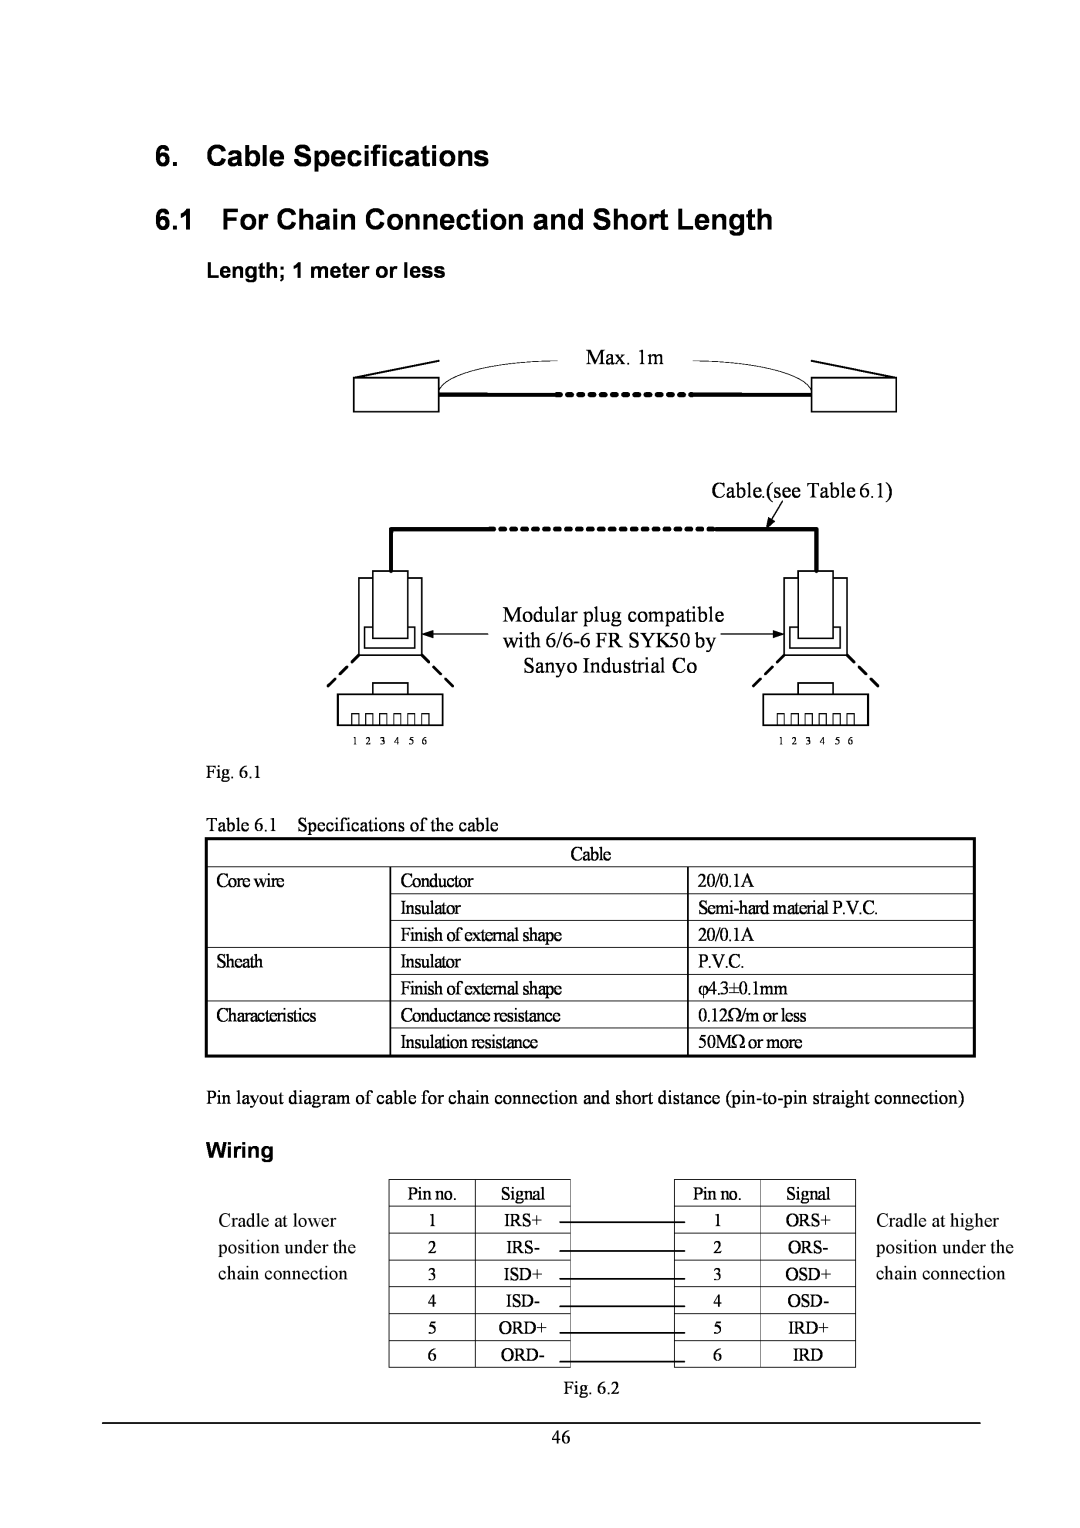 Casio handheld terminals Cable Specifications 6.1 For Chain Connection and Short Length, Length 1 meter or less, Wiring 